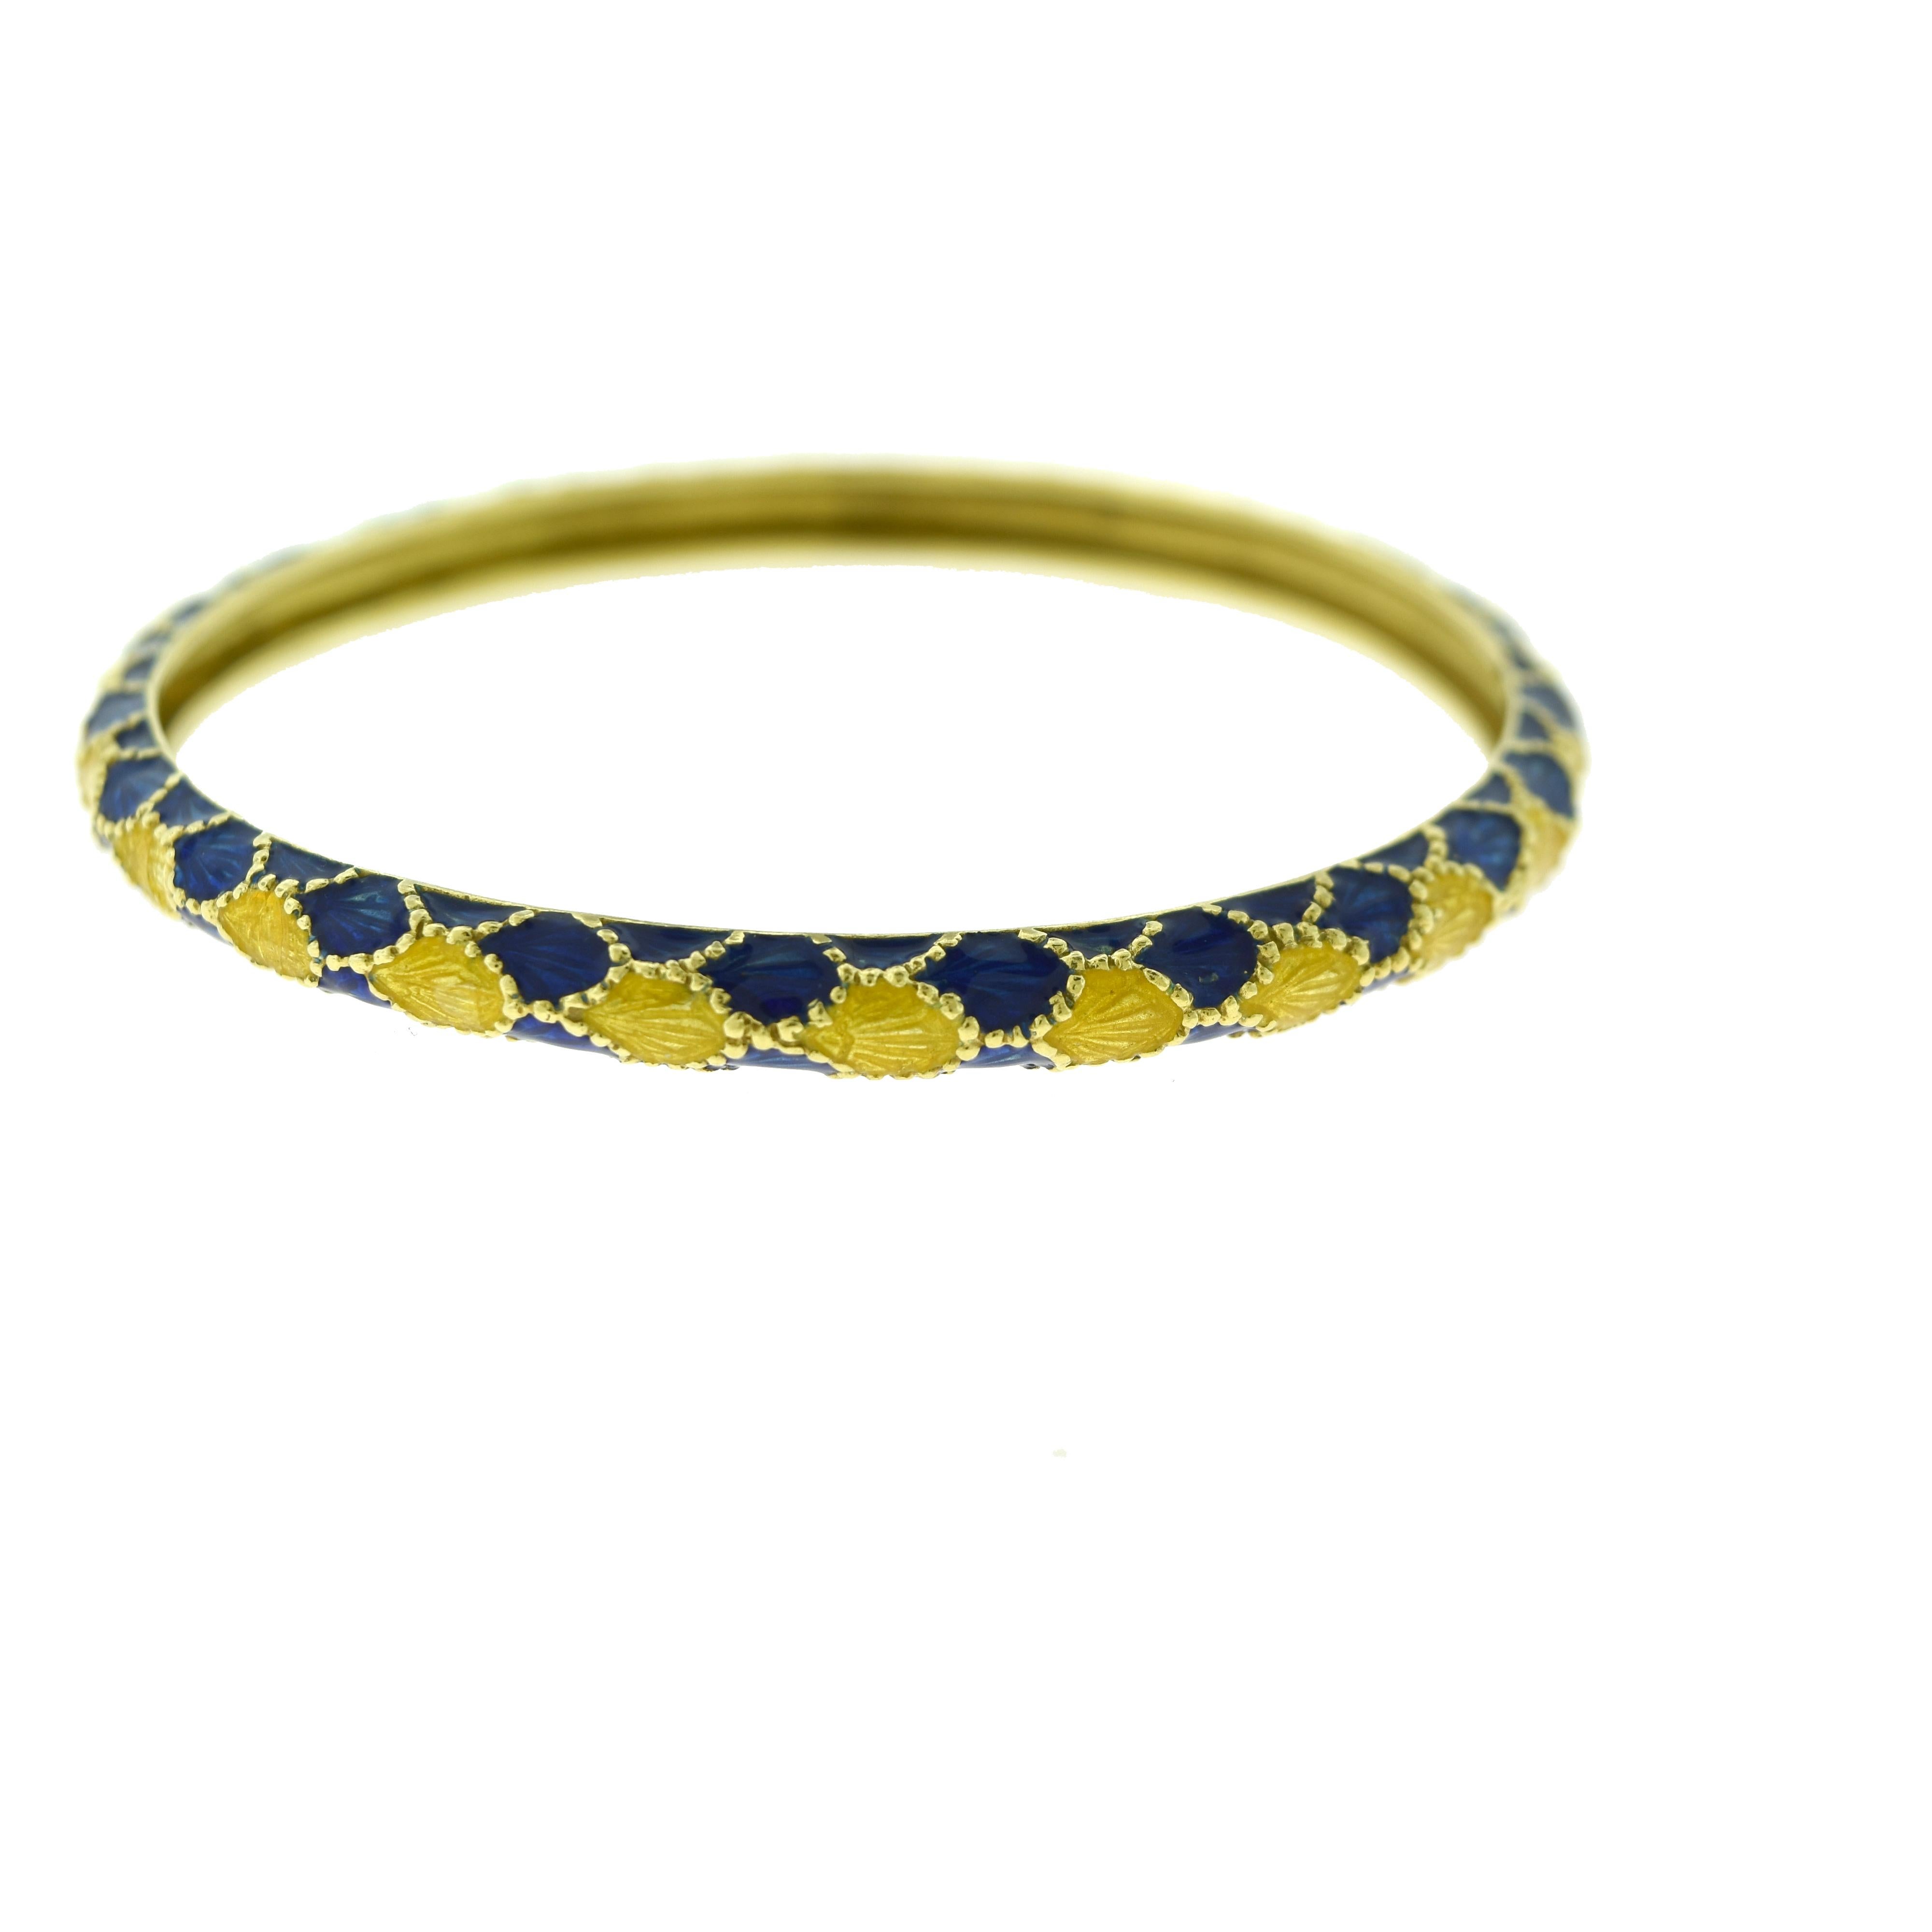 Brilliance Jewels, Miami
Questions? Call Us Anytime!
786,482,8100

Size: Small to Medium!
Designer: Tiffany & Co.
Style: Bracelet Bangle
Metal: 18k Yellow Gold
Non-Metal Material: Blue Enamel
Total Item Weight (grams): 25.3
Bangle Width: 5.38 mm